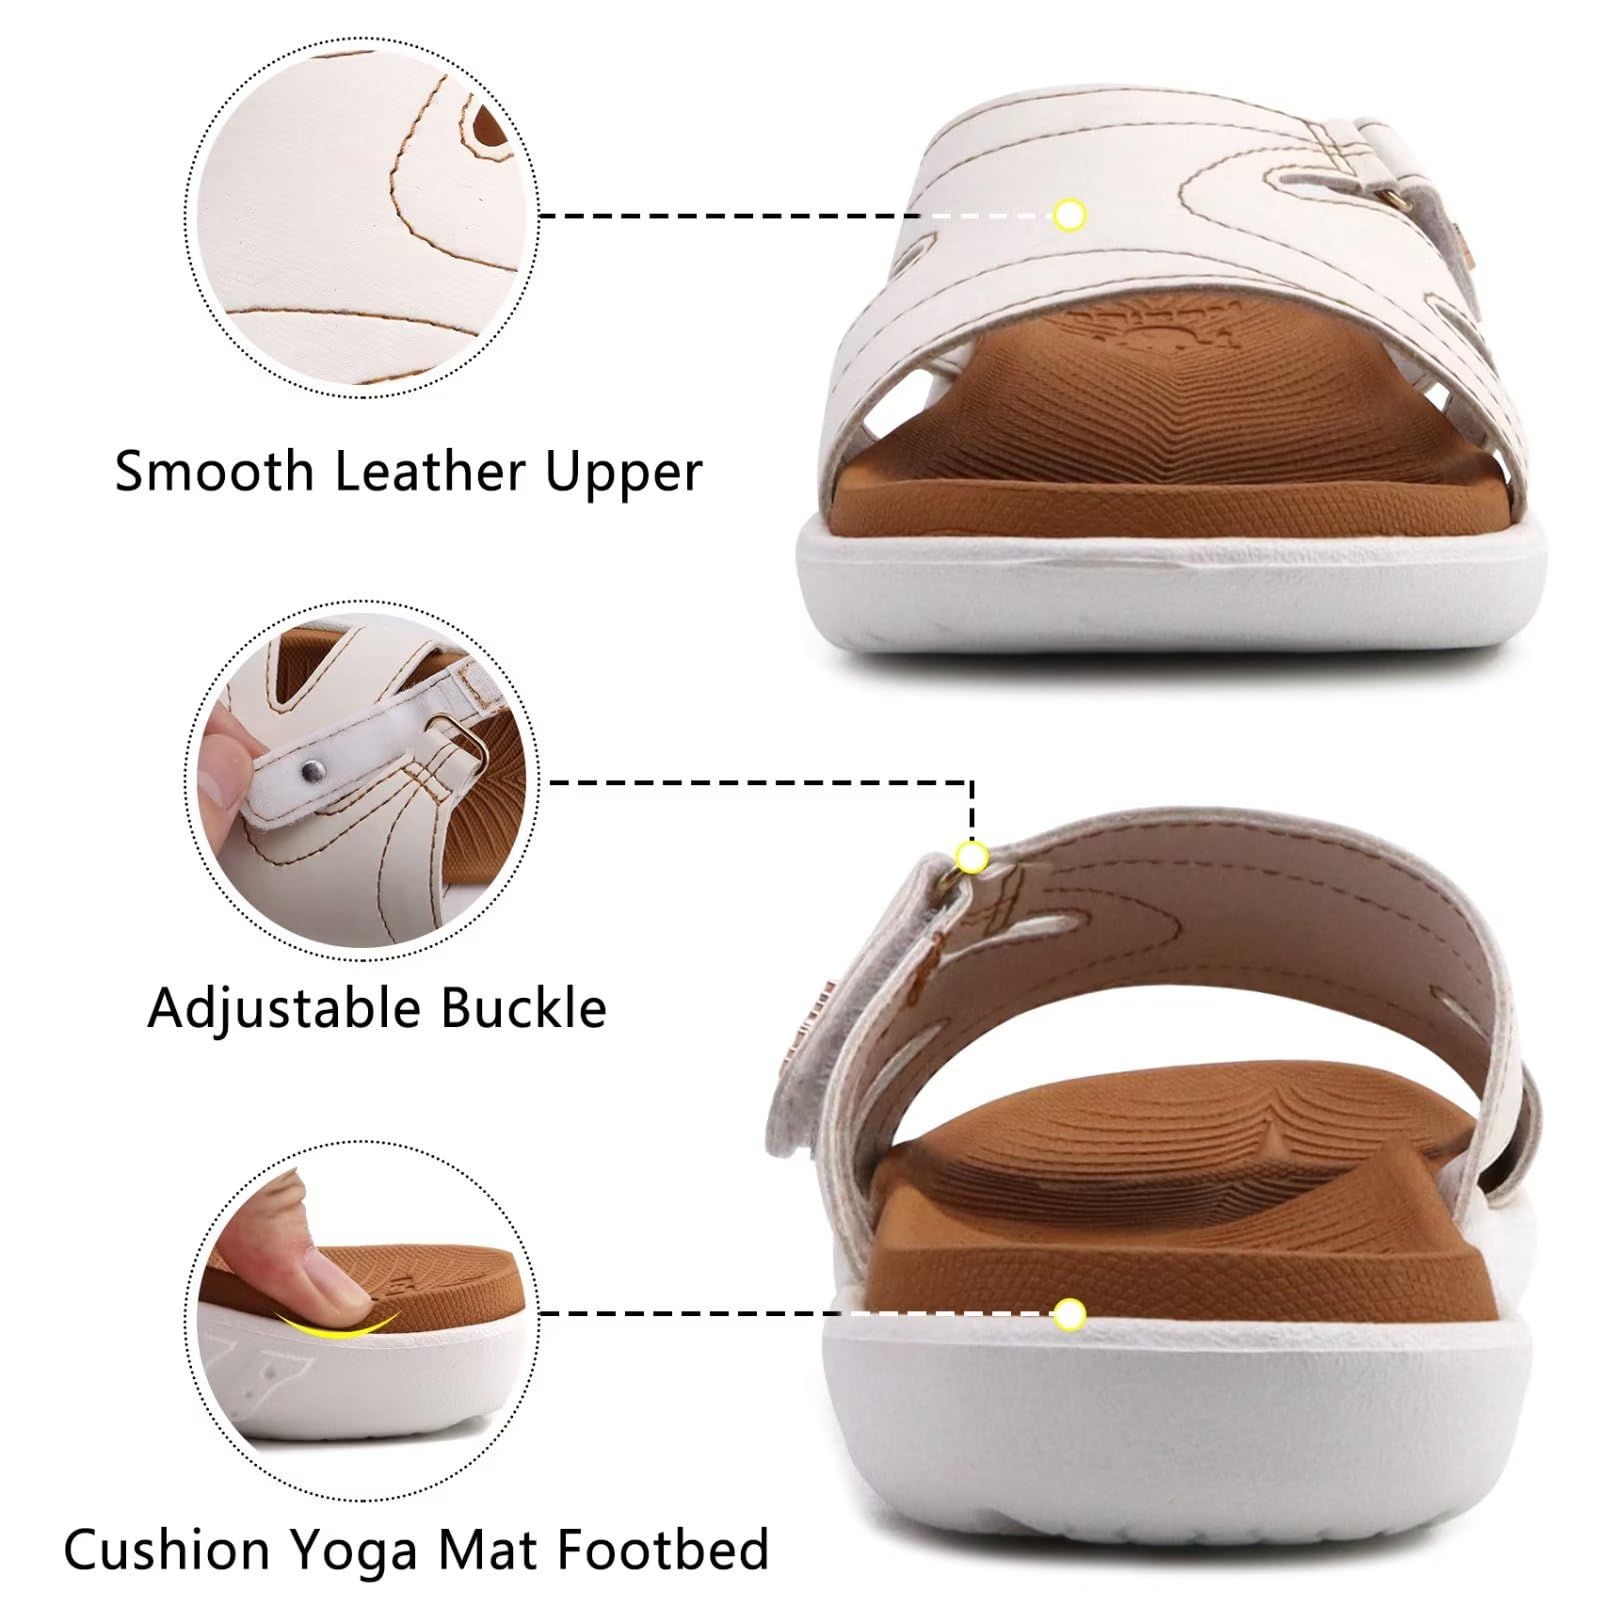 KuaiLu Womens Fashion Orthotic Slides Ladies Lightweight Athletic Sandals Slip On Thick Cushion Slippers Sandals With Comfortable Plantar Fasciitis Arch Support White Khaki 8